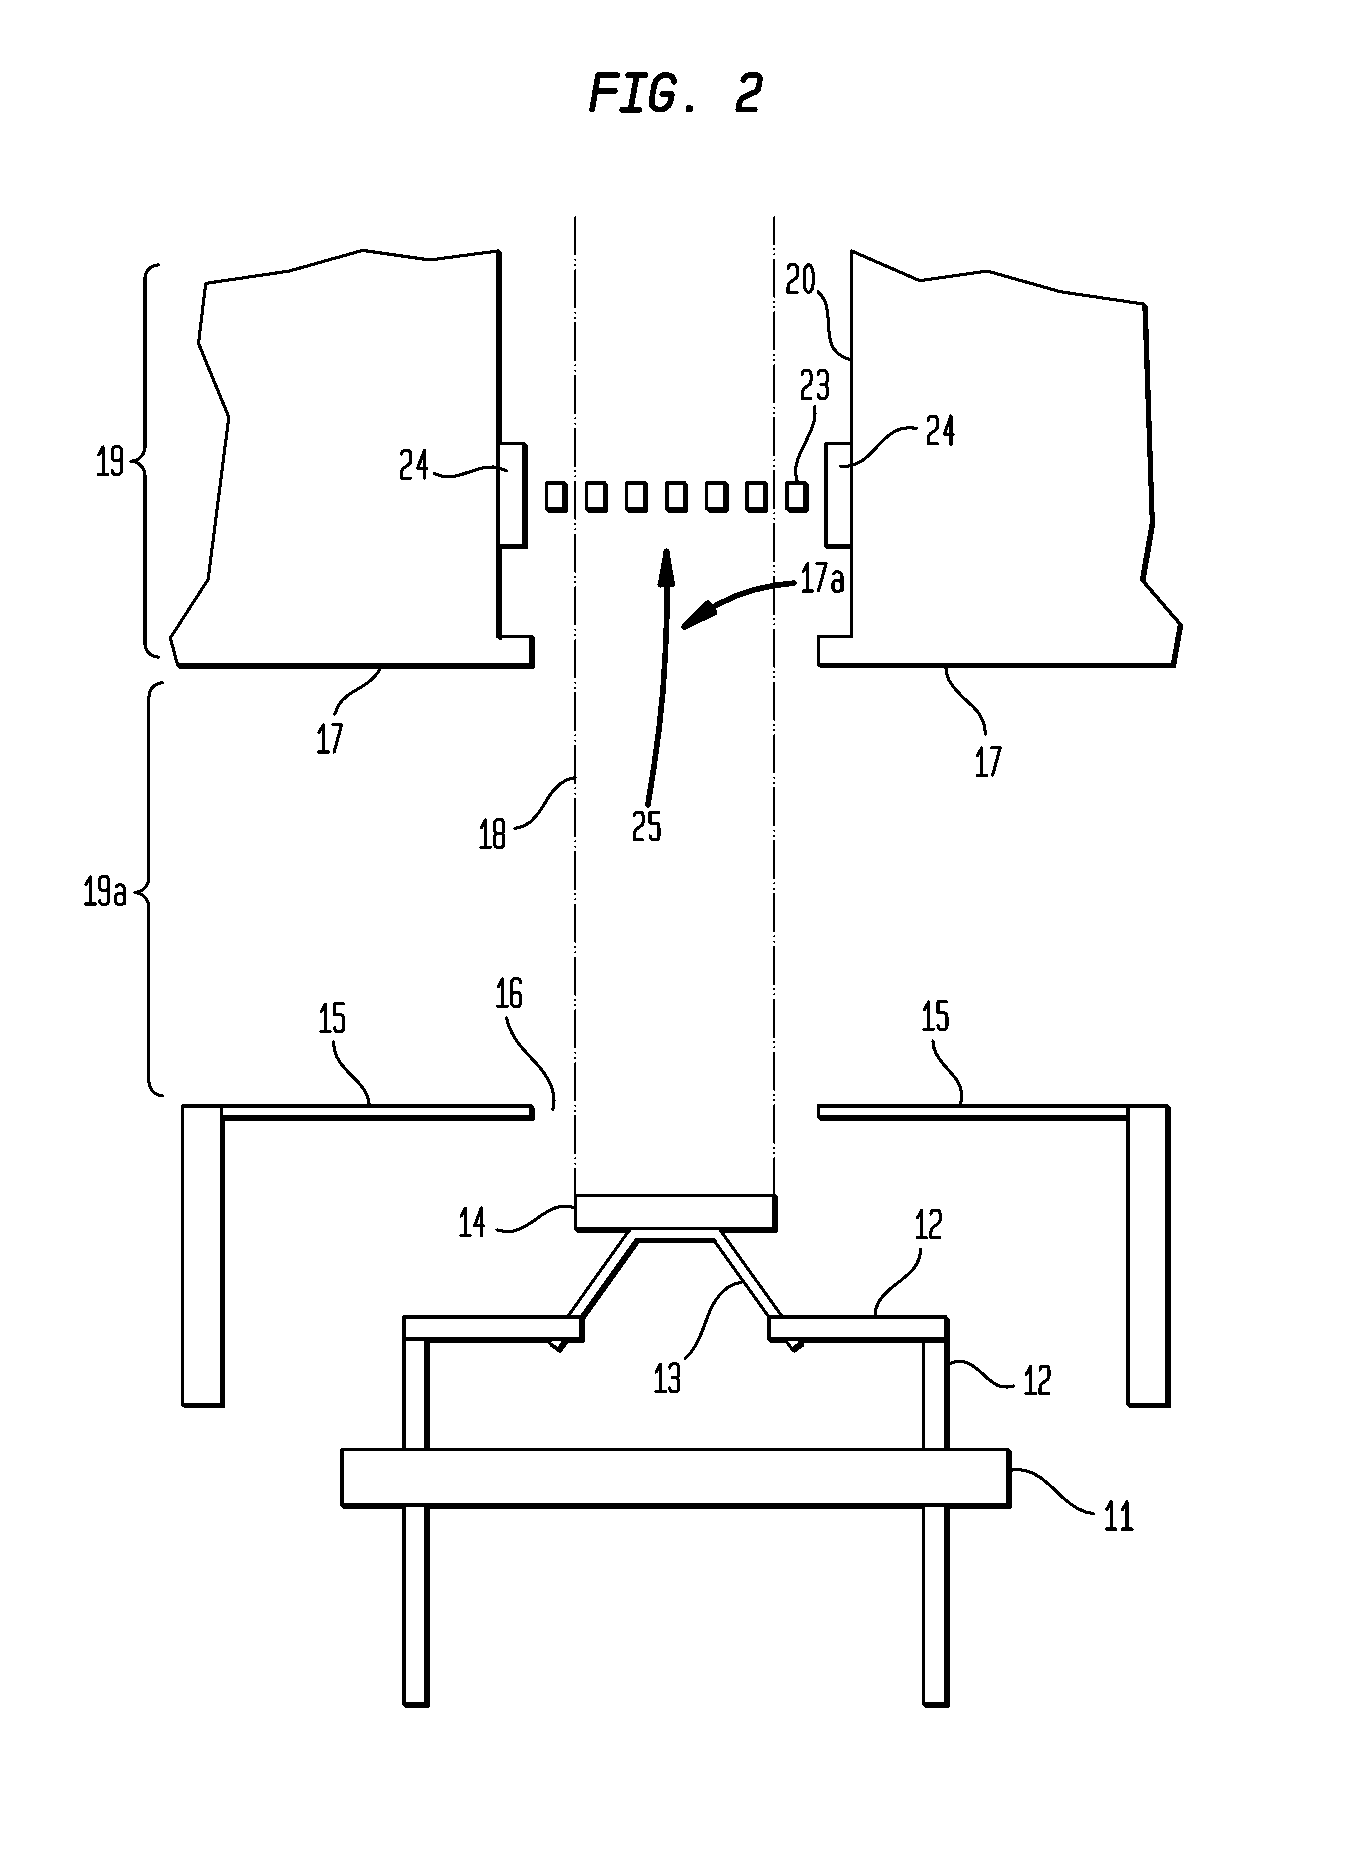 Lens array for electron beam lithography tool